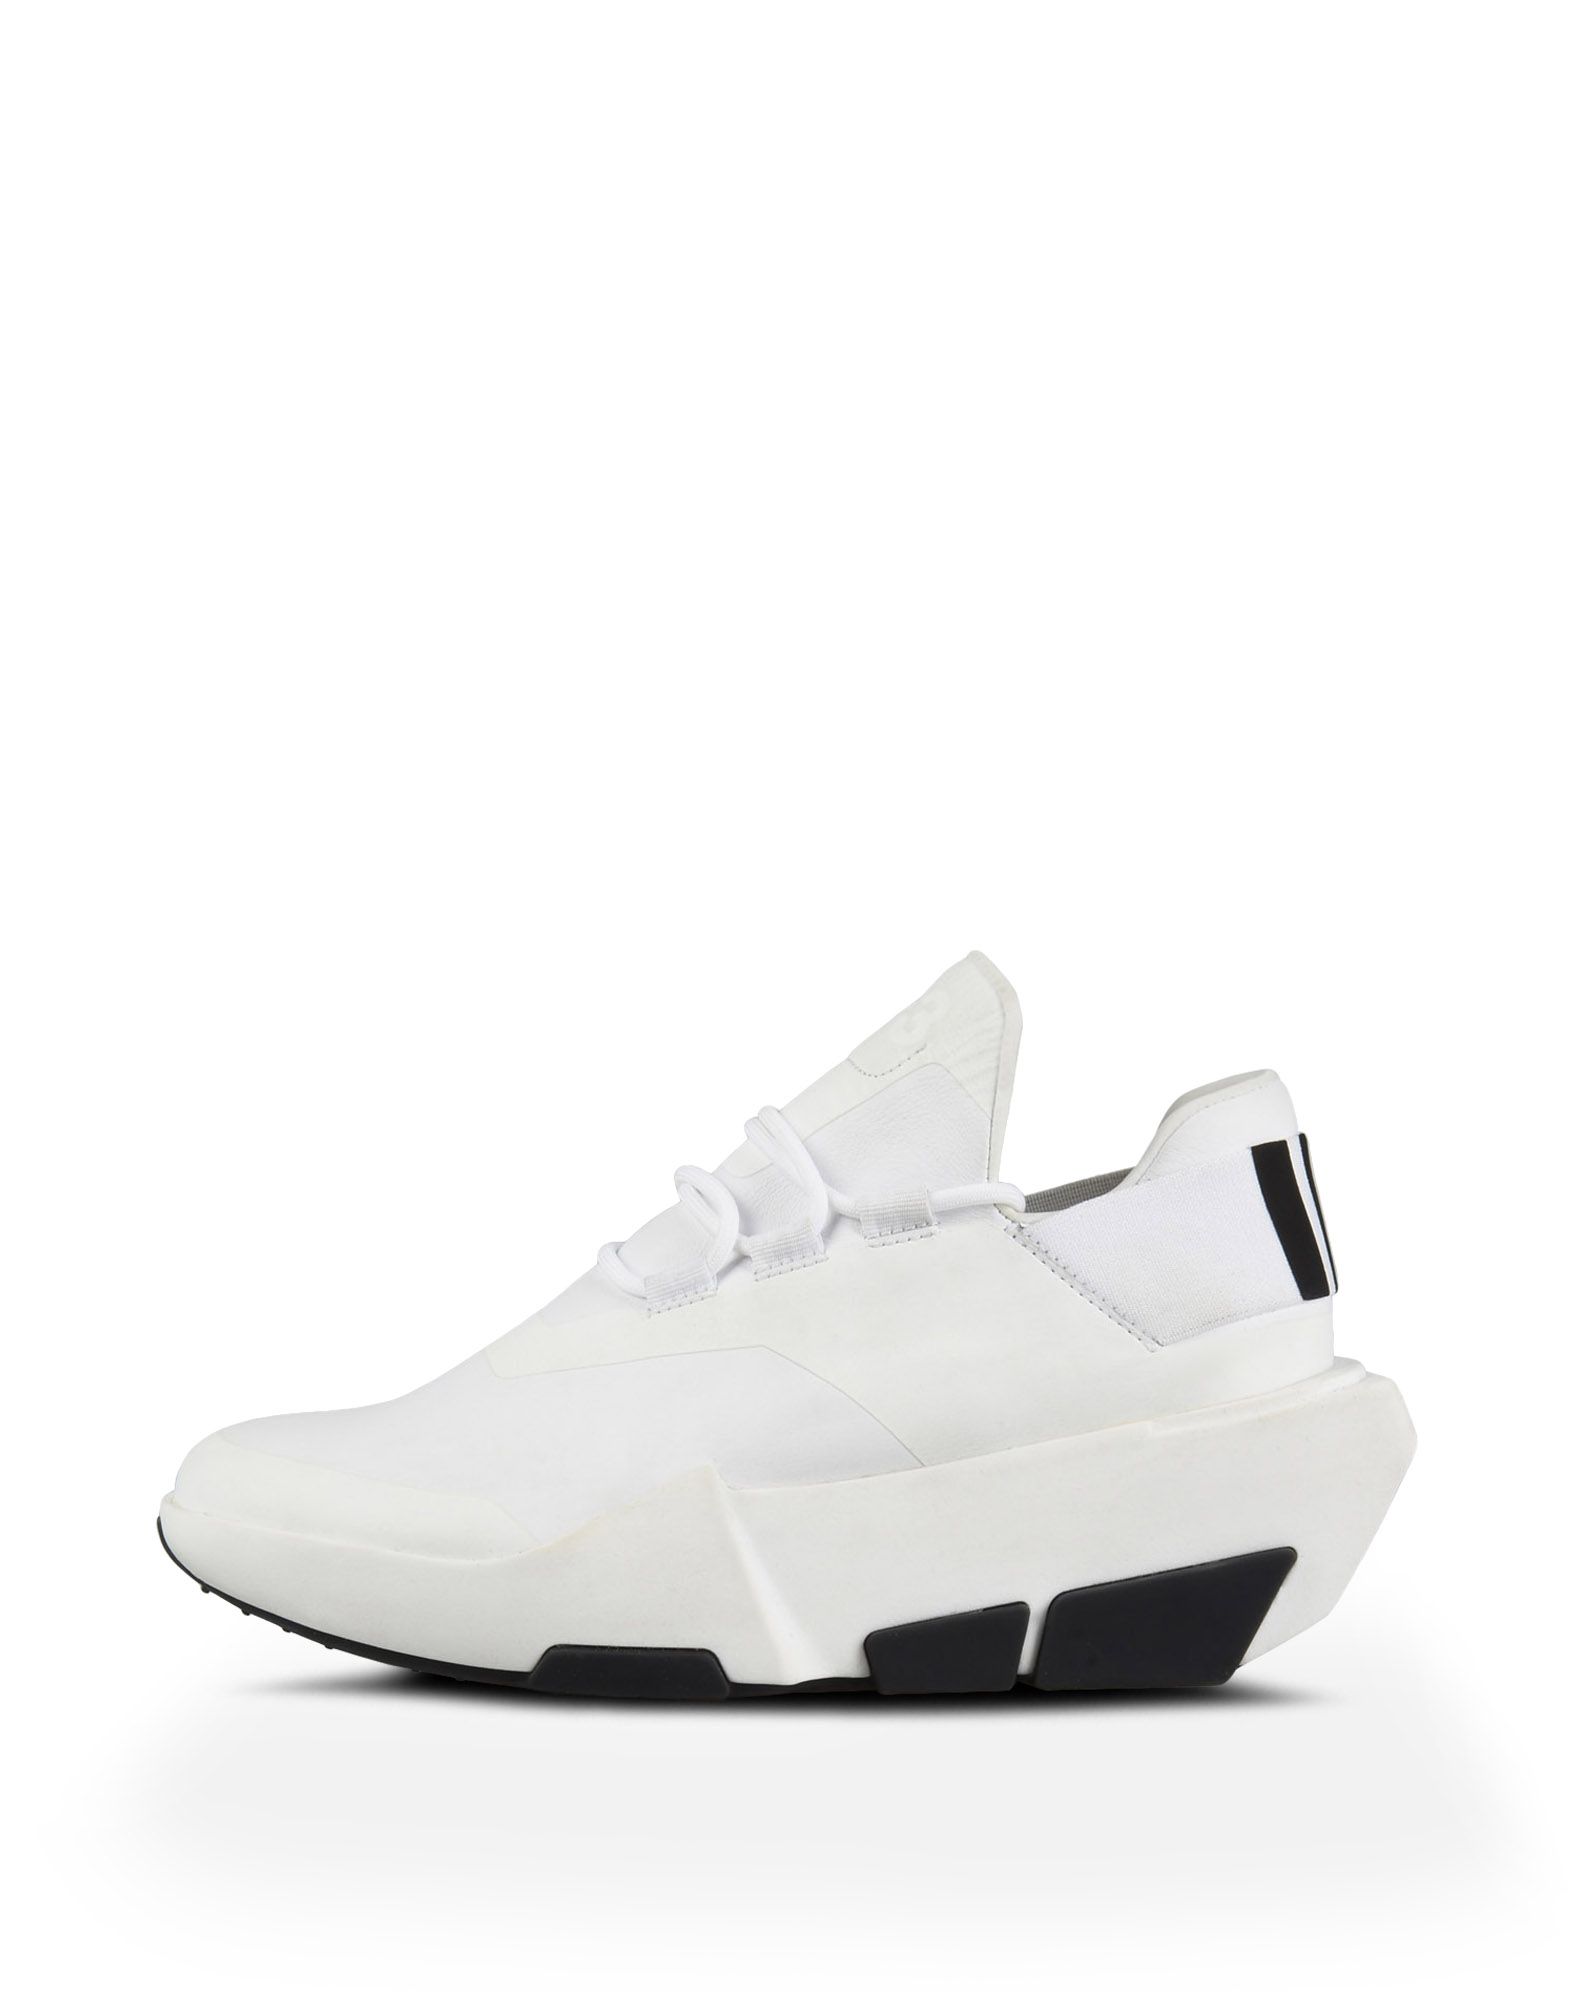 Y 3 MIRA SNEAKER for Women | Adidas Y-3 Official Store